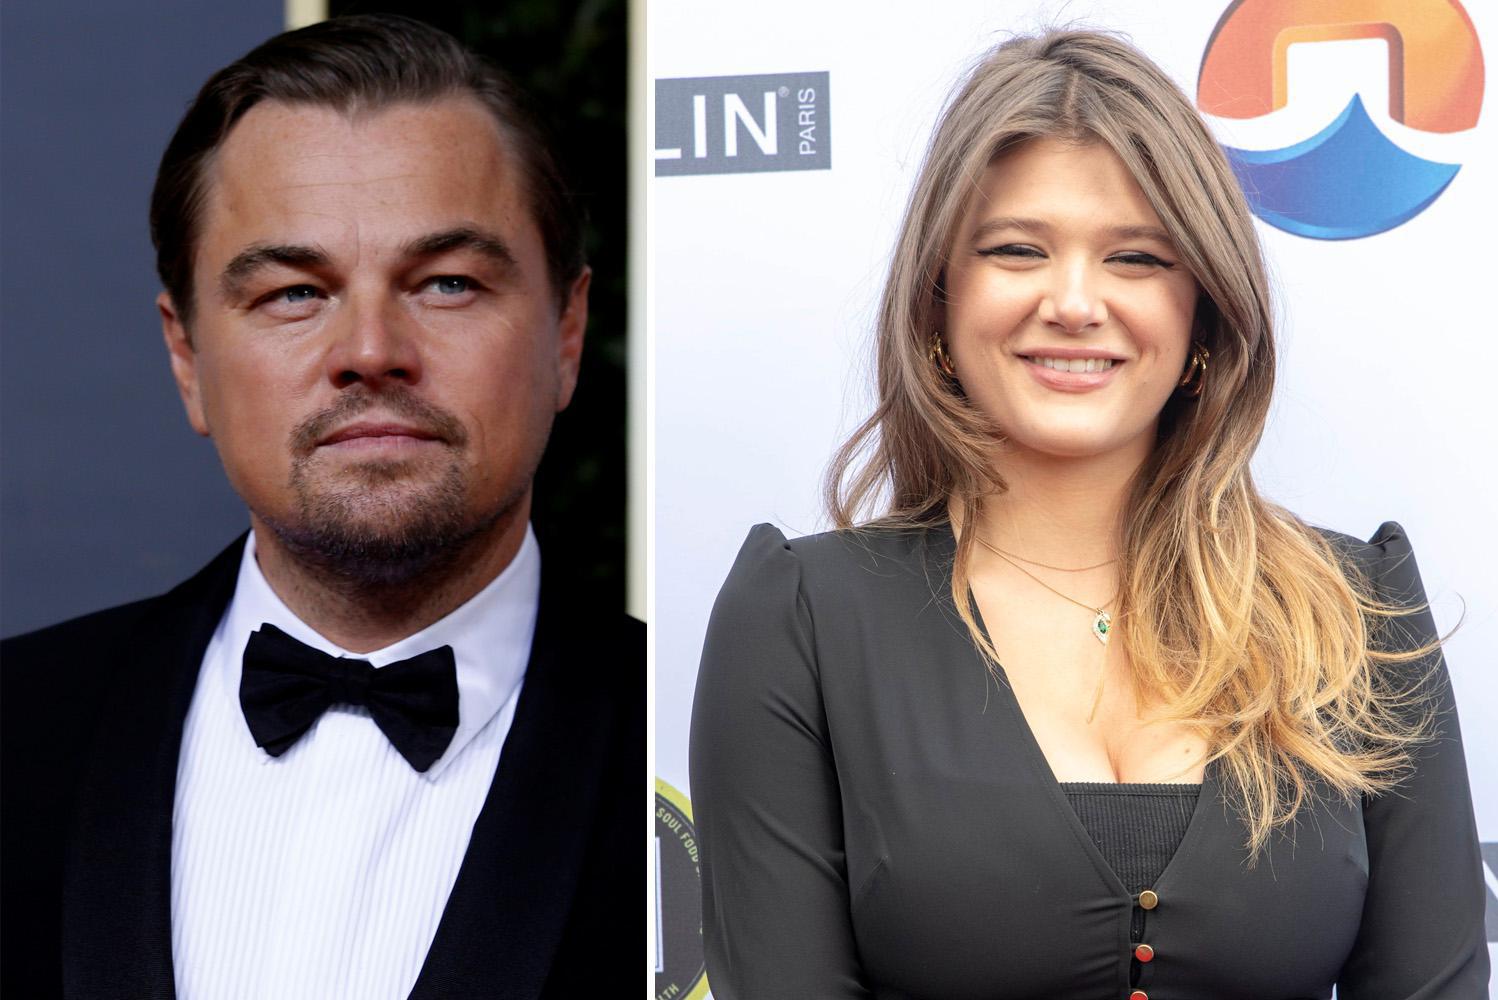 After four months apart, Leonardo DiCaprio, 48, has found love again (and she’s a lot younger again)